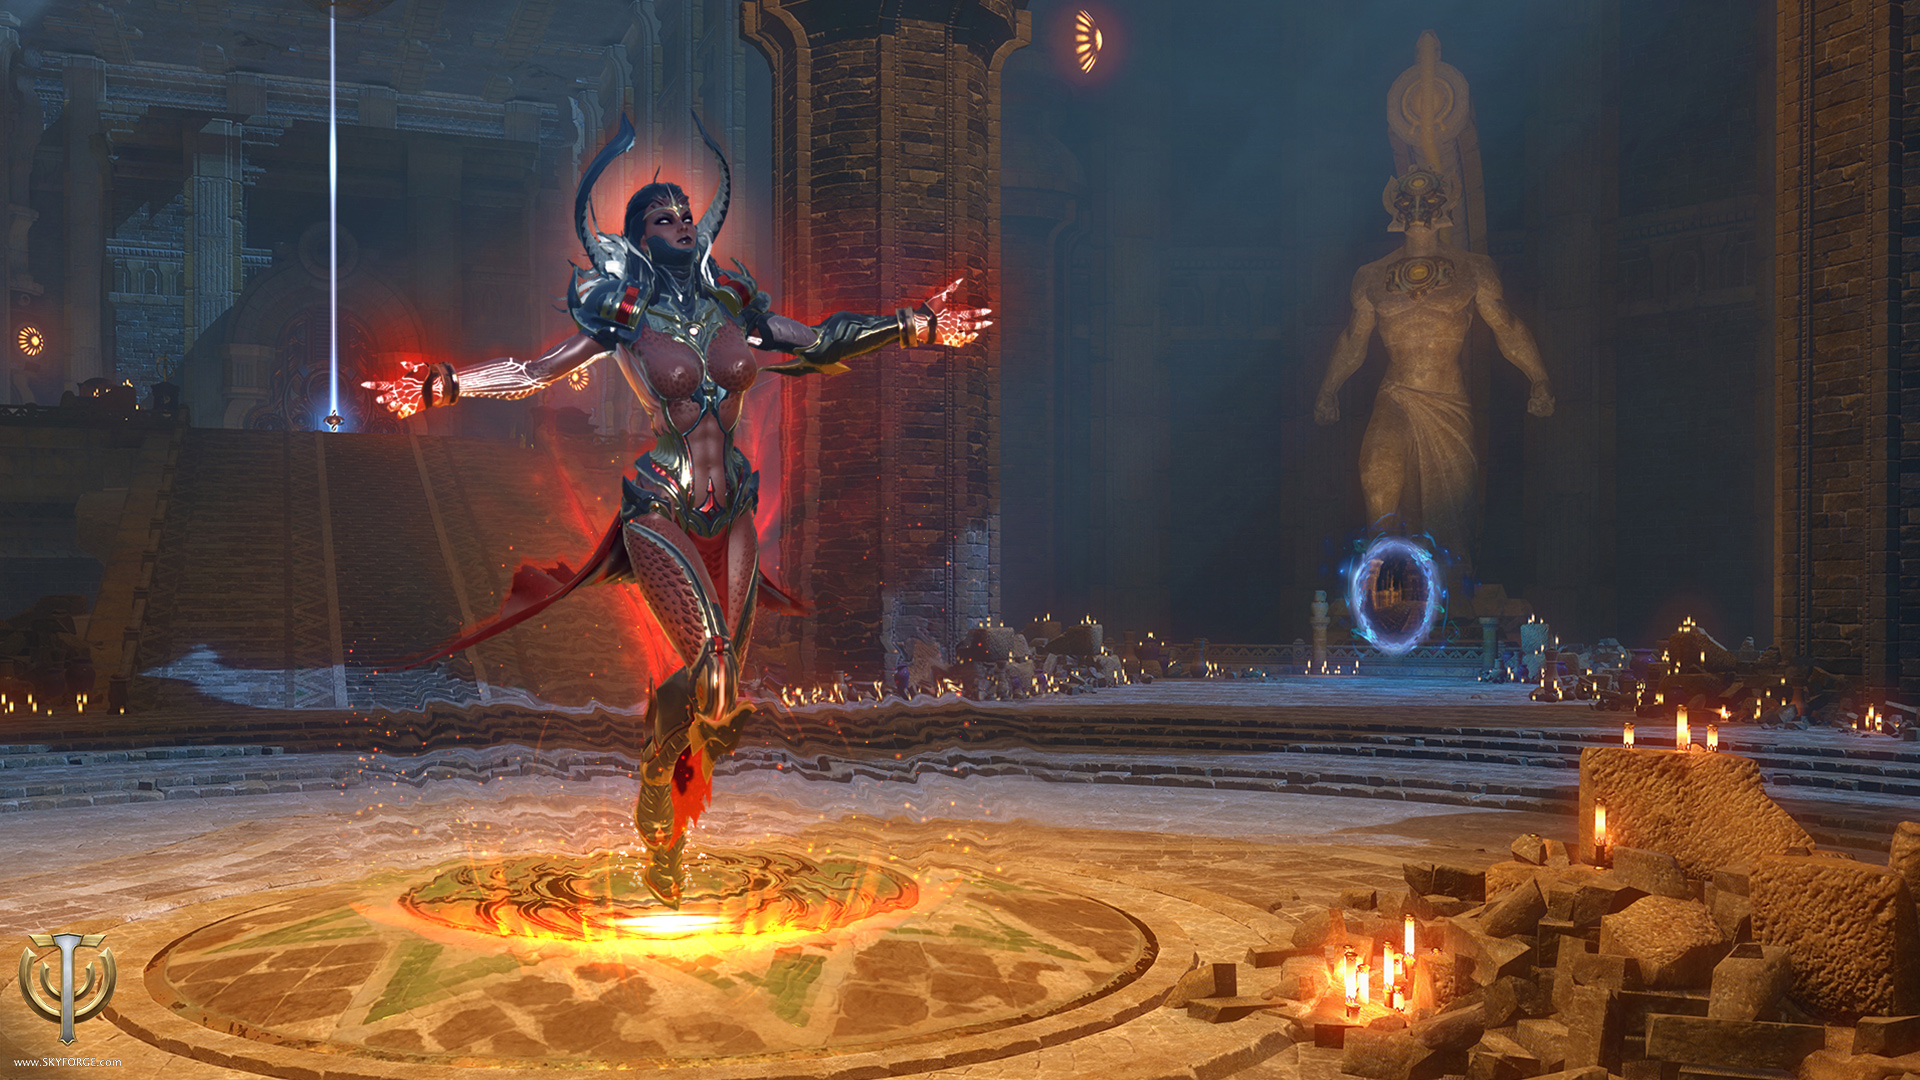 Skyforge Backgrounds, Compatible - PC, Mobile, Gadgets| 1920x1080 px